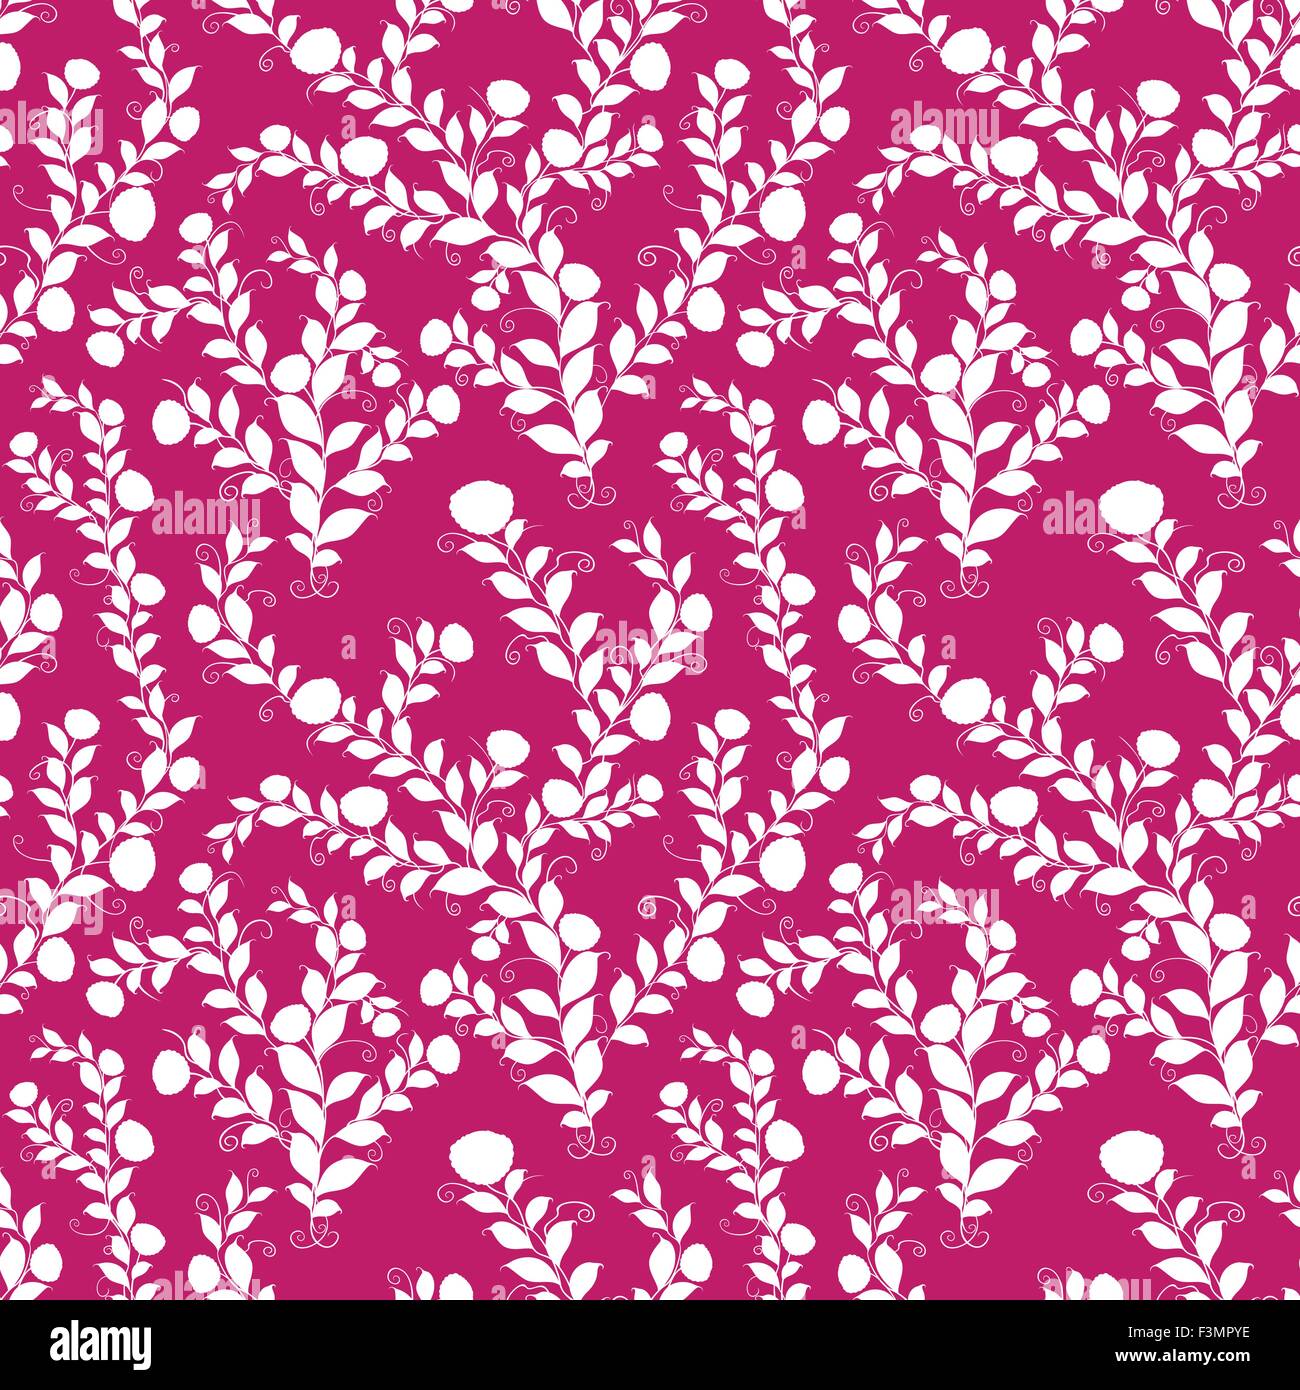 Floral seamless vector pattern with flower white silhouettes on pink background, hand drawing illustration Stock Vector